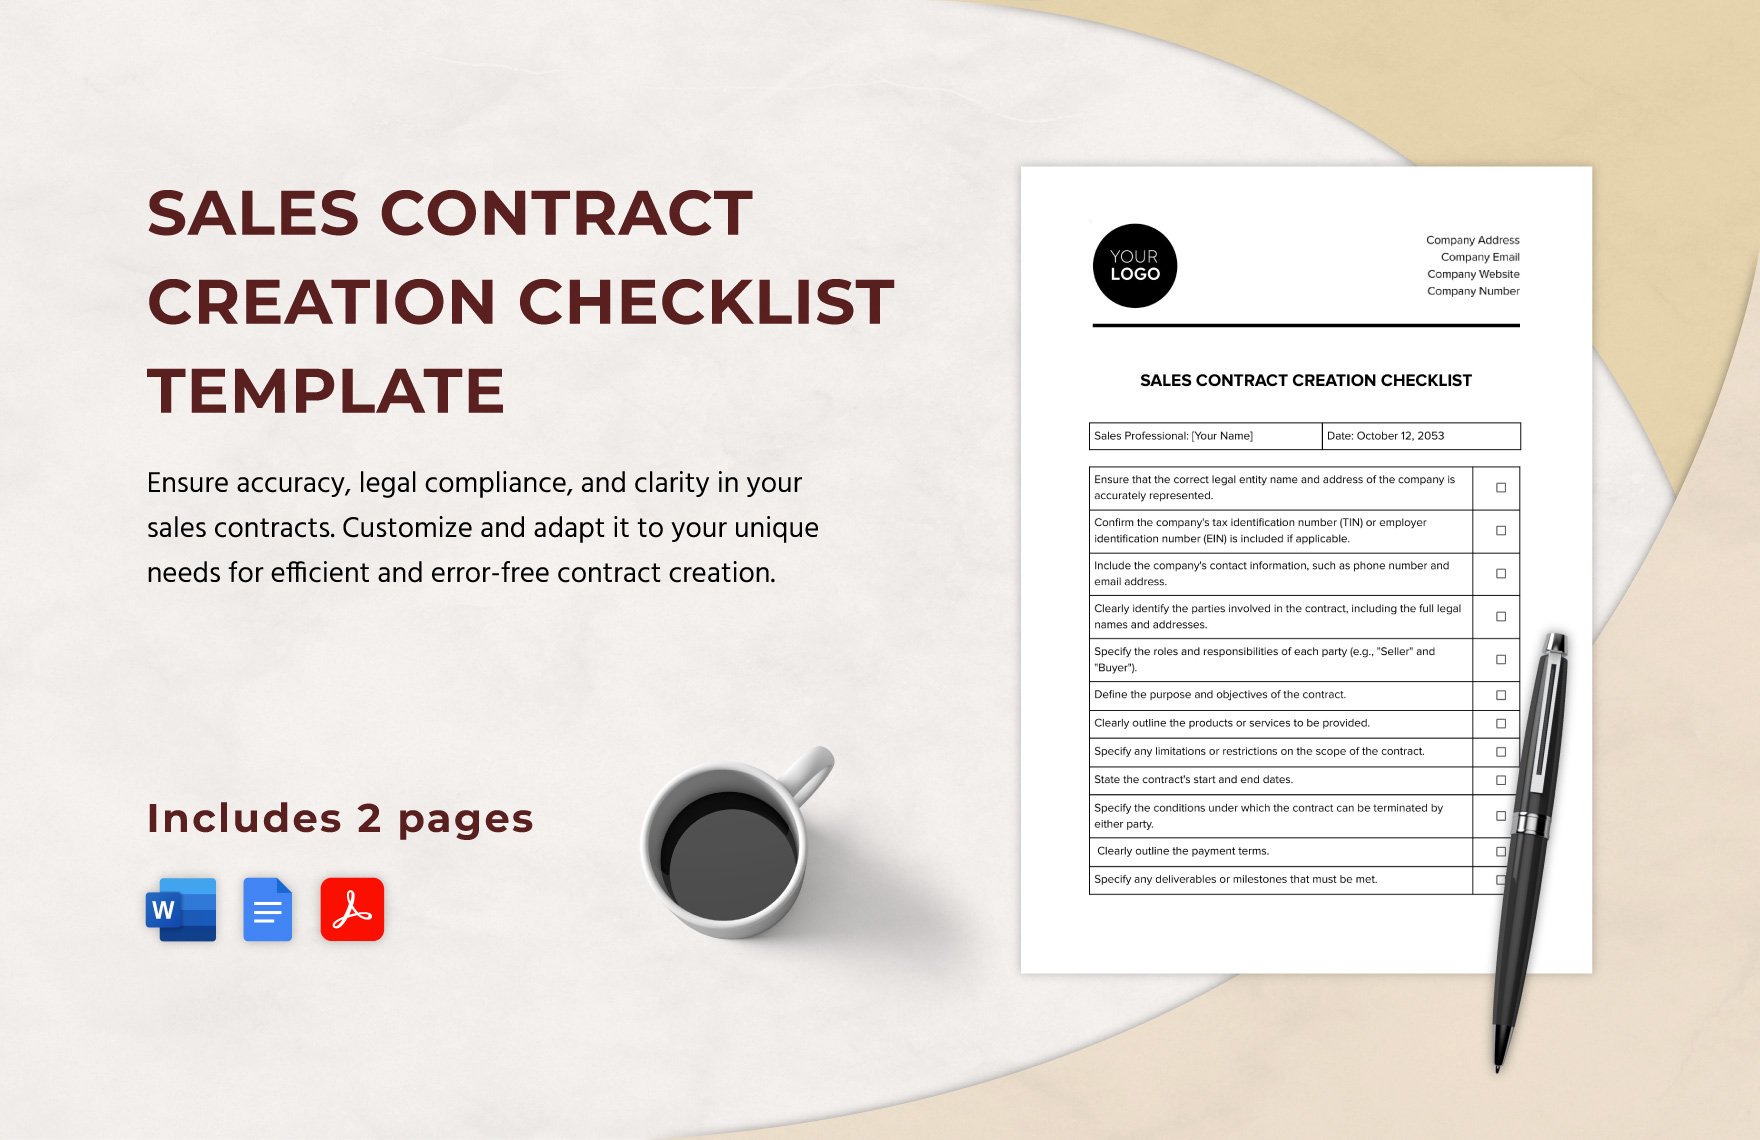 Sales Contract Creation Checklist Template